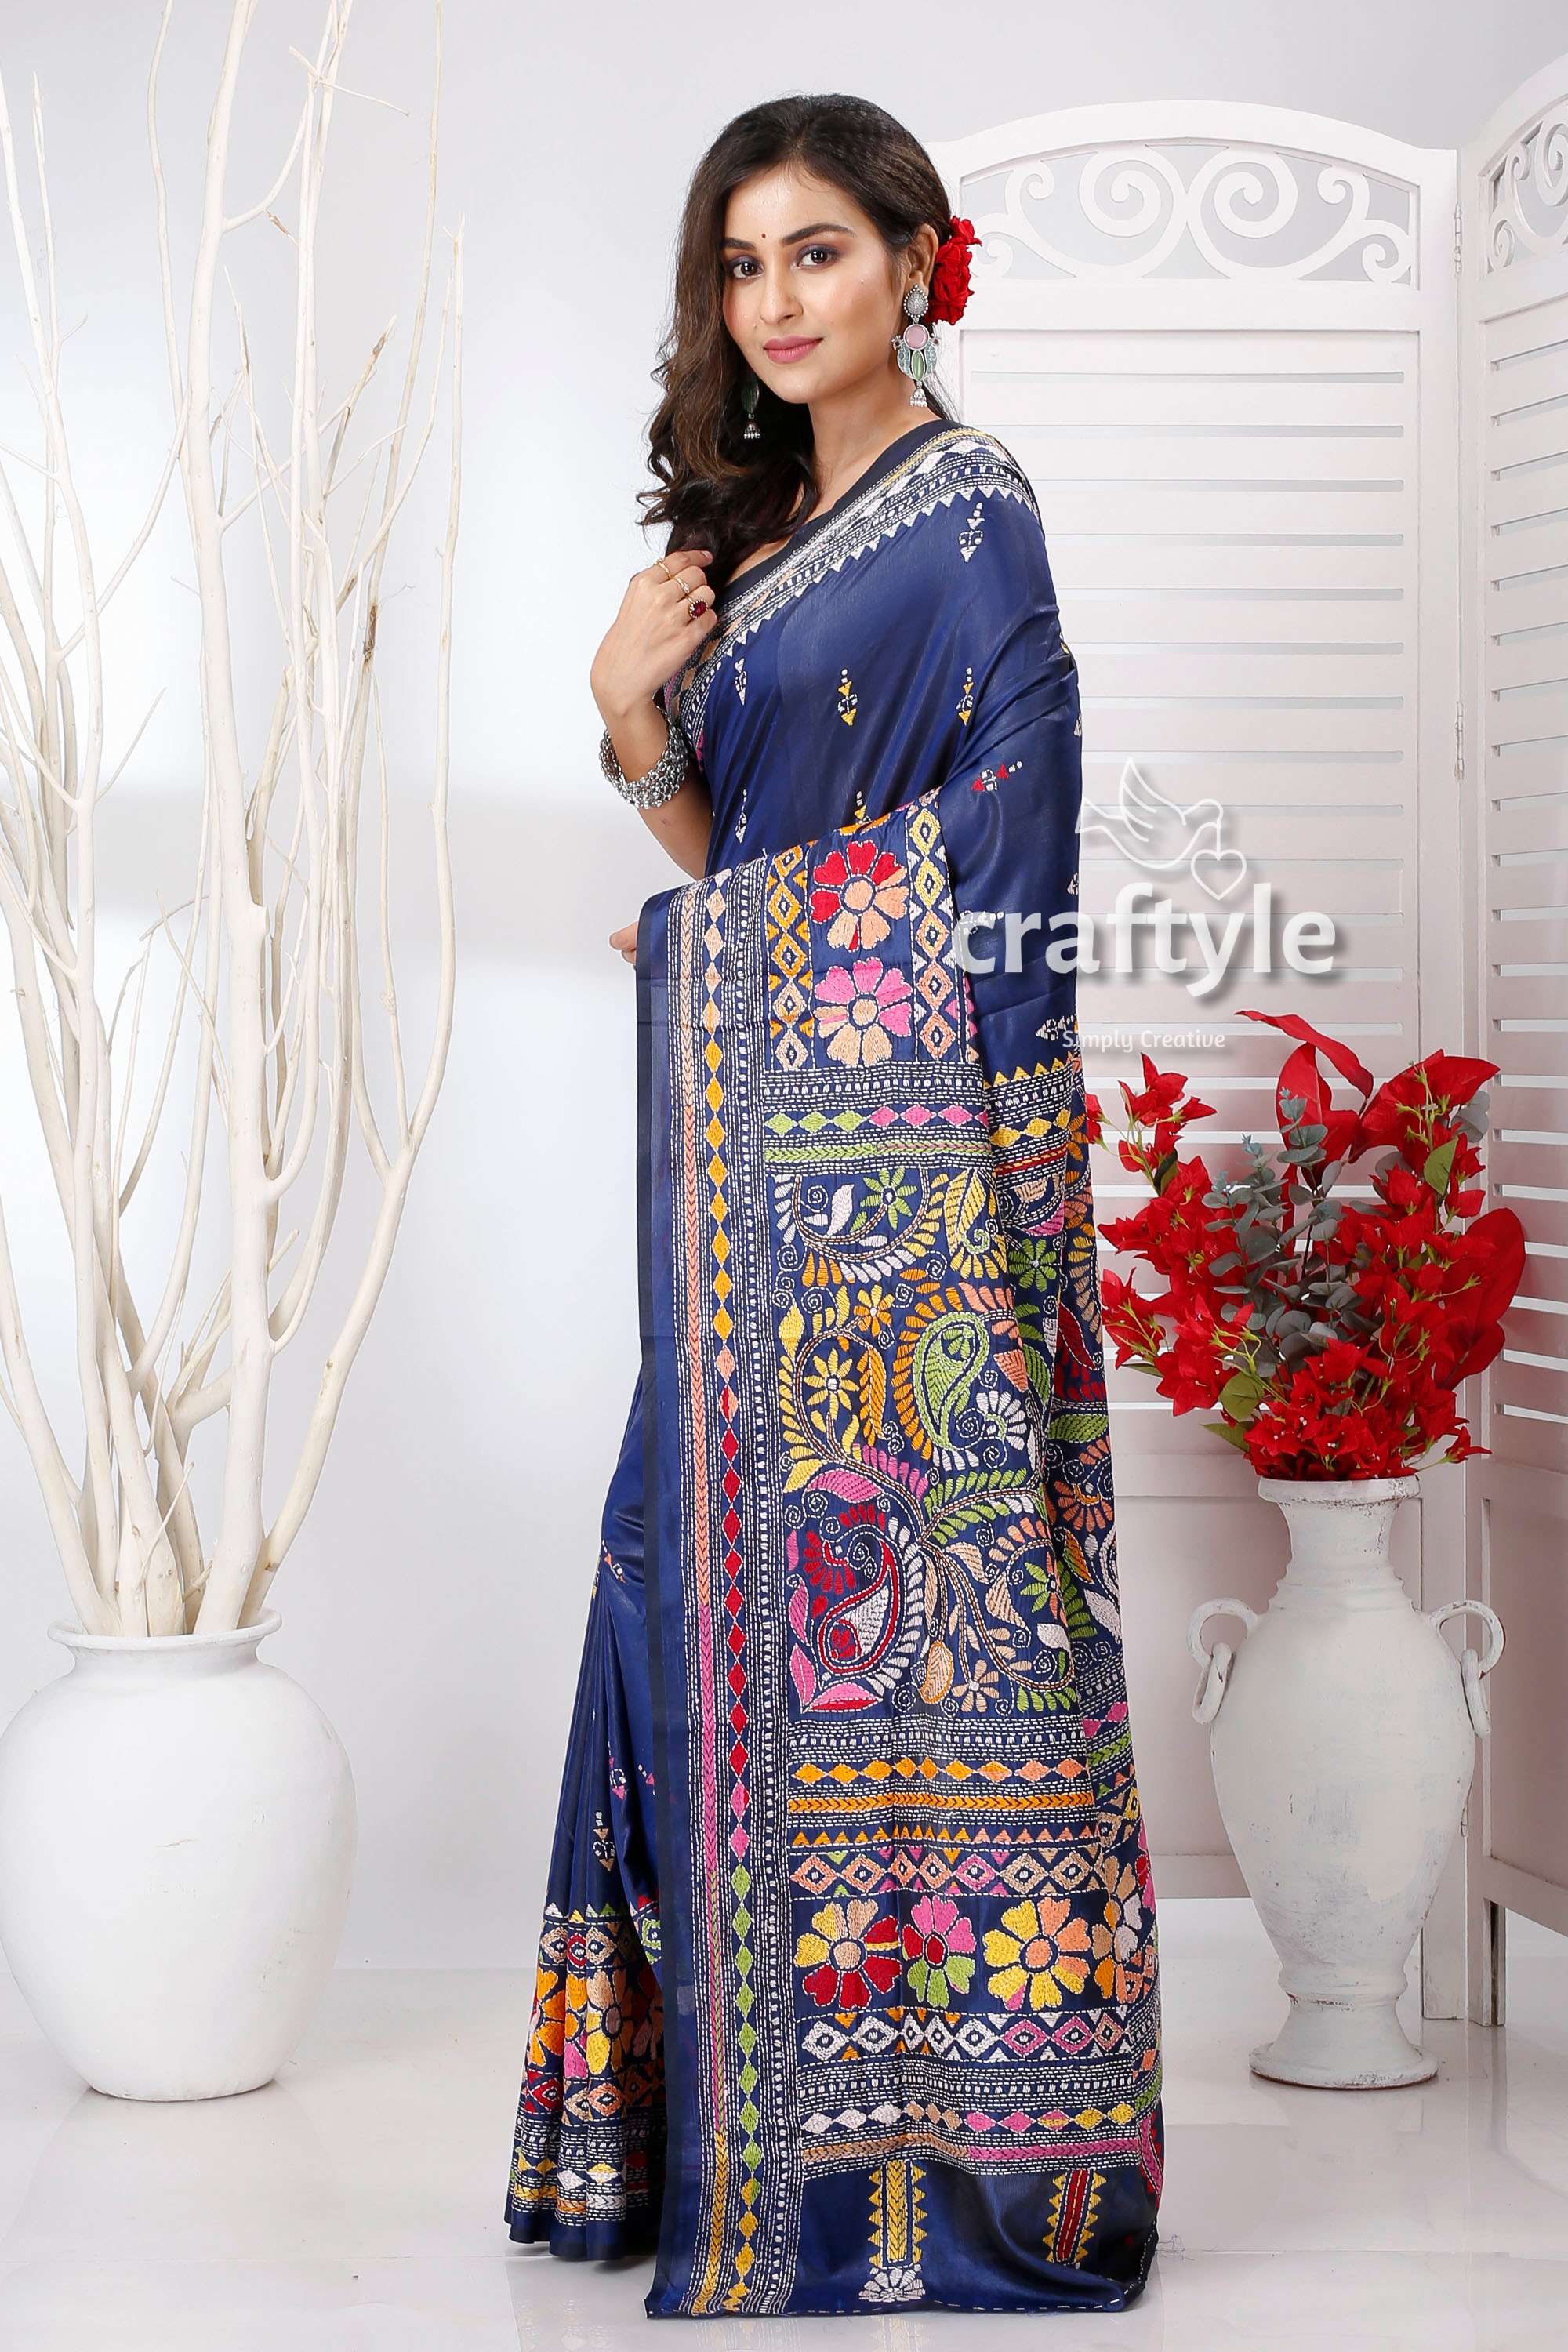 Midnight Blue Multicolor Floral Kantha Embroidery Silk Saree - Craftyle